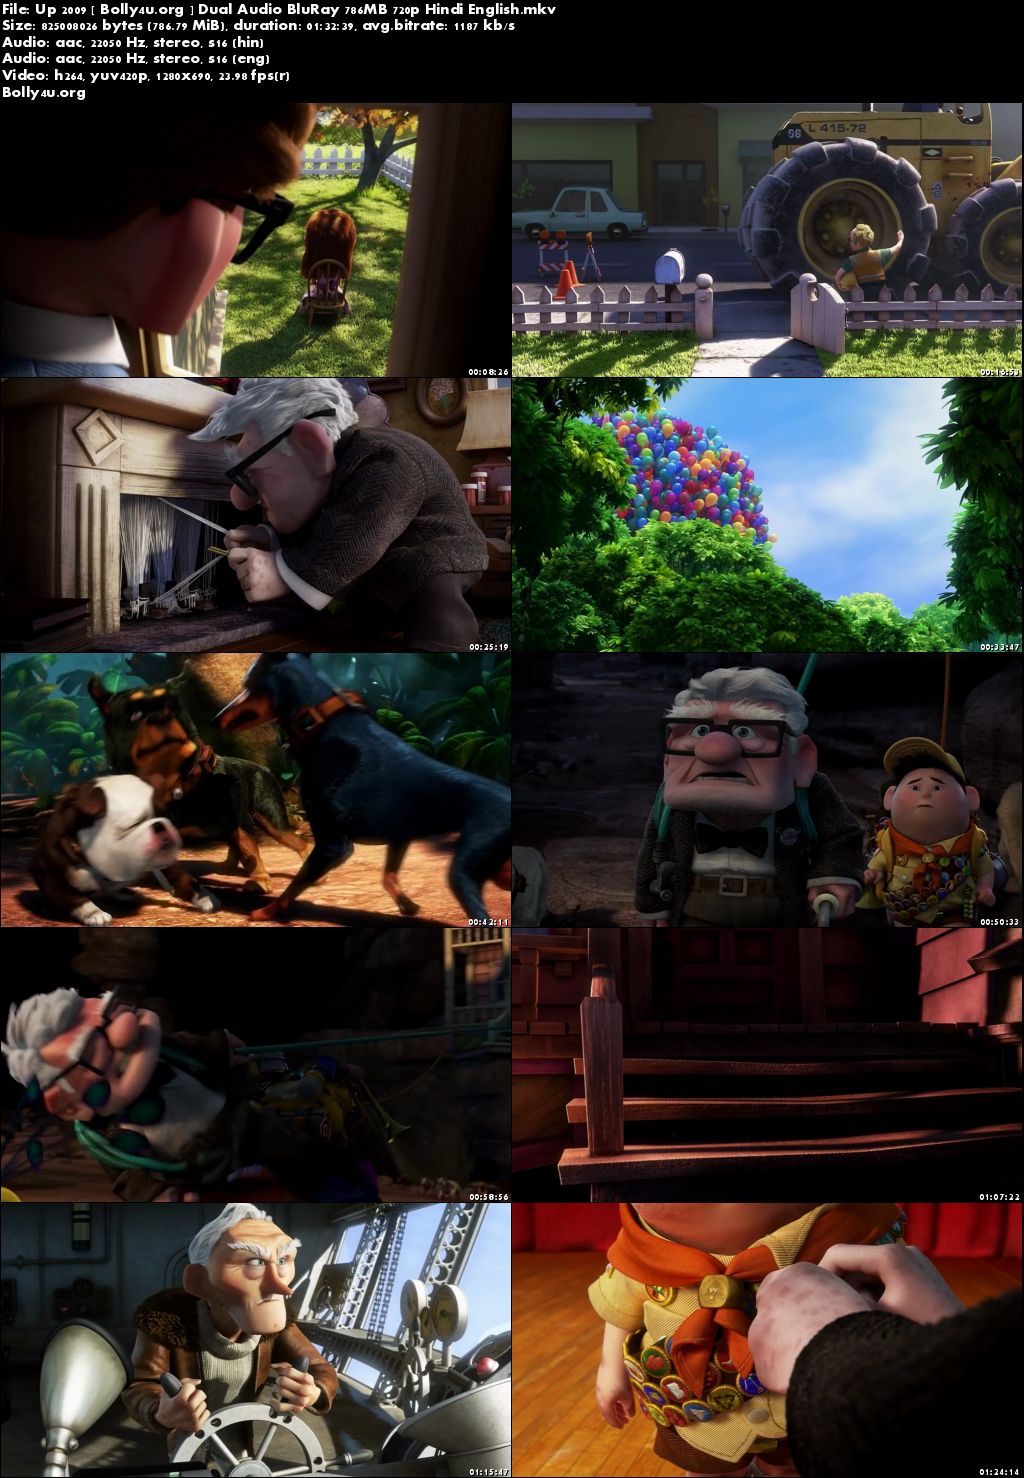 Up 2009 Movies Plot : Carl Fredricksen spent his entire life dreaming of exploring the globe and experiencing life to its fullest. But at age 78, life seems to have passed him by, until a twist of fate (and a persistent 8-year old Wilderness Explorer named Russell) gives him a new lease on life.